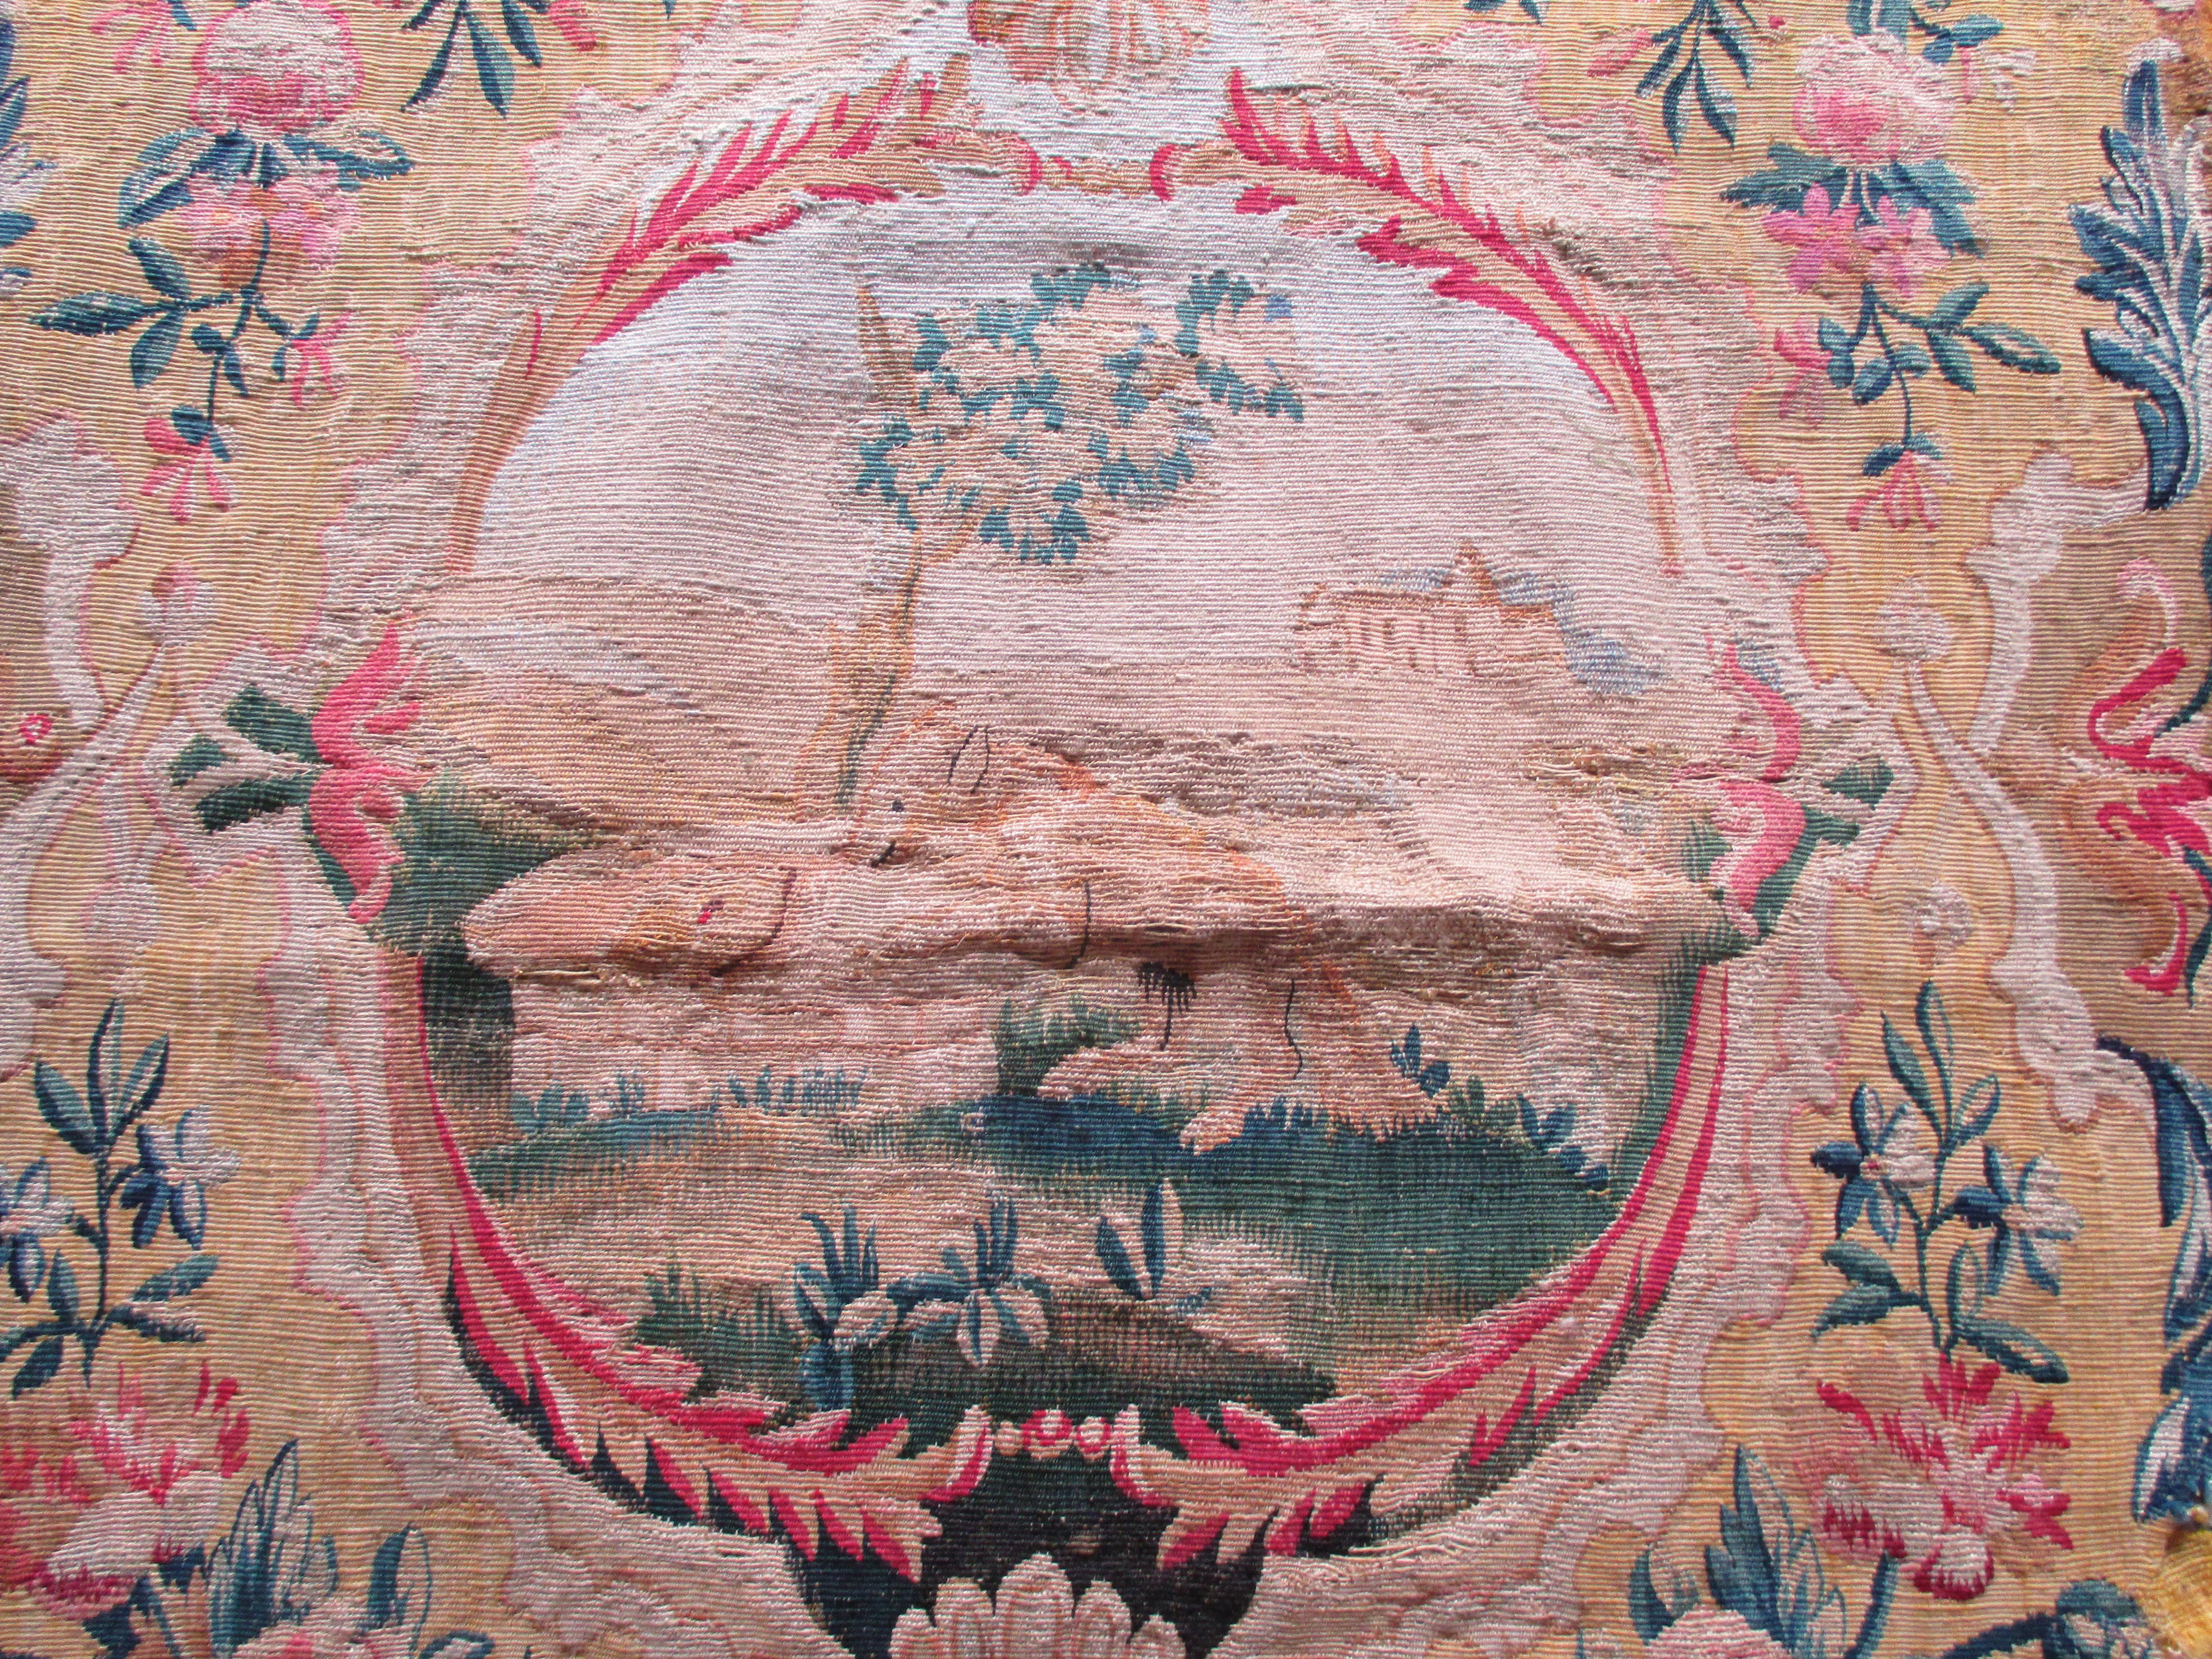 Antique tapestry fragment picturing center oval medallion with bucolic scene
In shades of red, yellow, blue, orange, pink and taupe. Includes a fox in the center with a castle in the background.
Sold as is, needs restoration and backing. 
Ideal